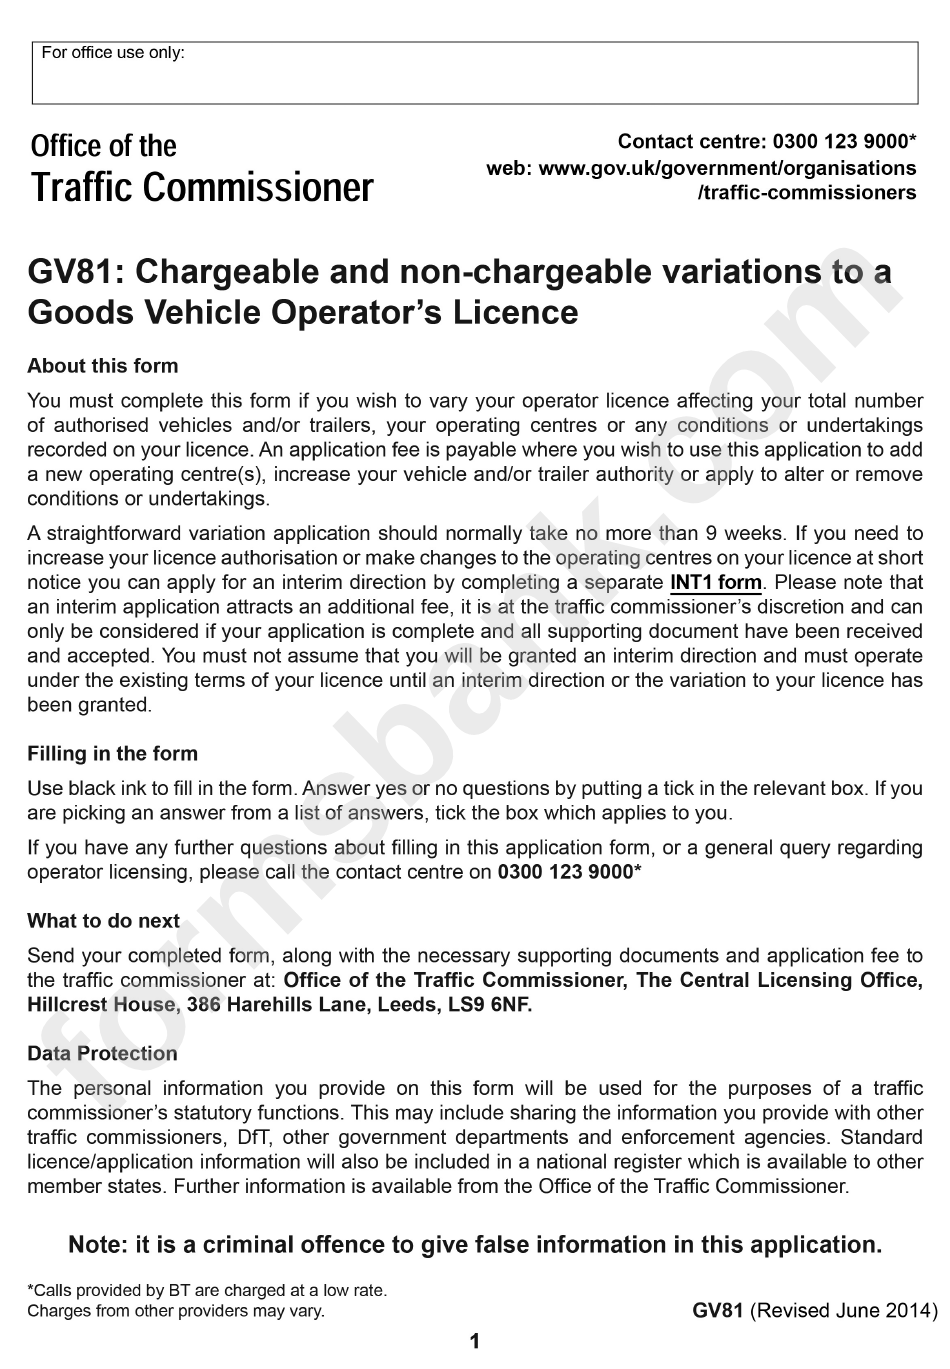 Form Gv81 - Chargeable And Non-Chargeable Variations To A Goods Vehicle Operator